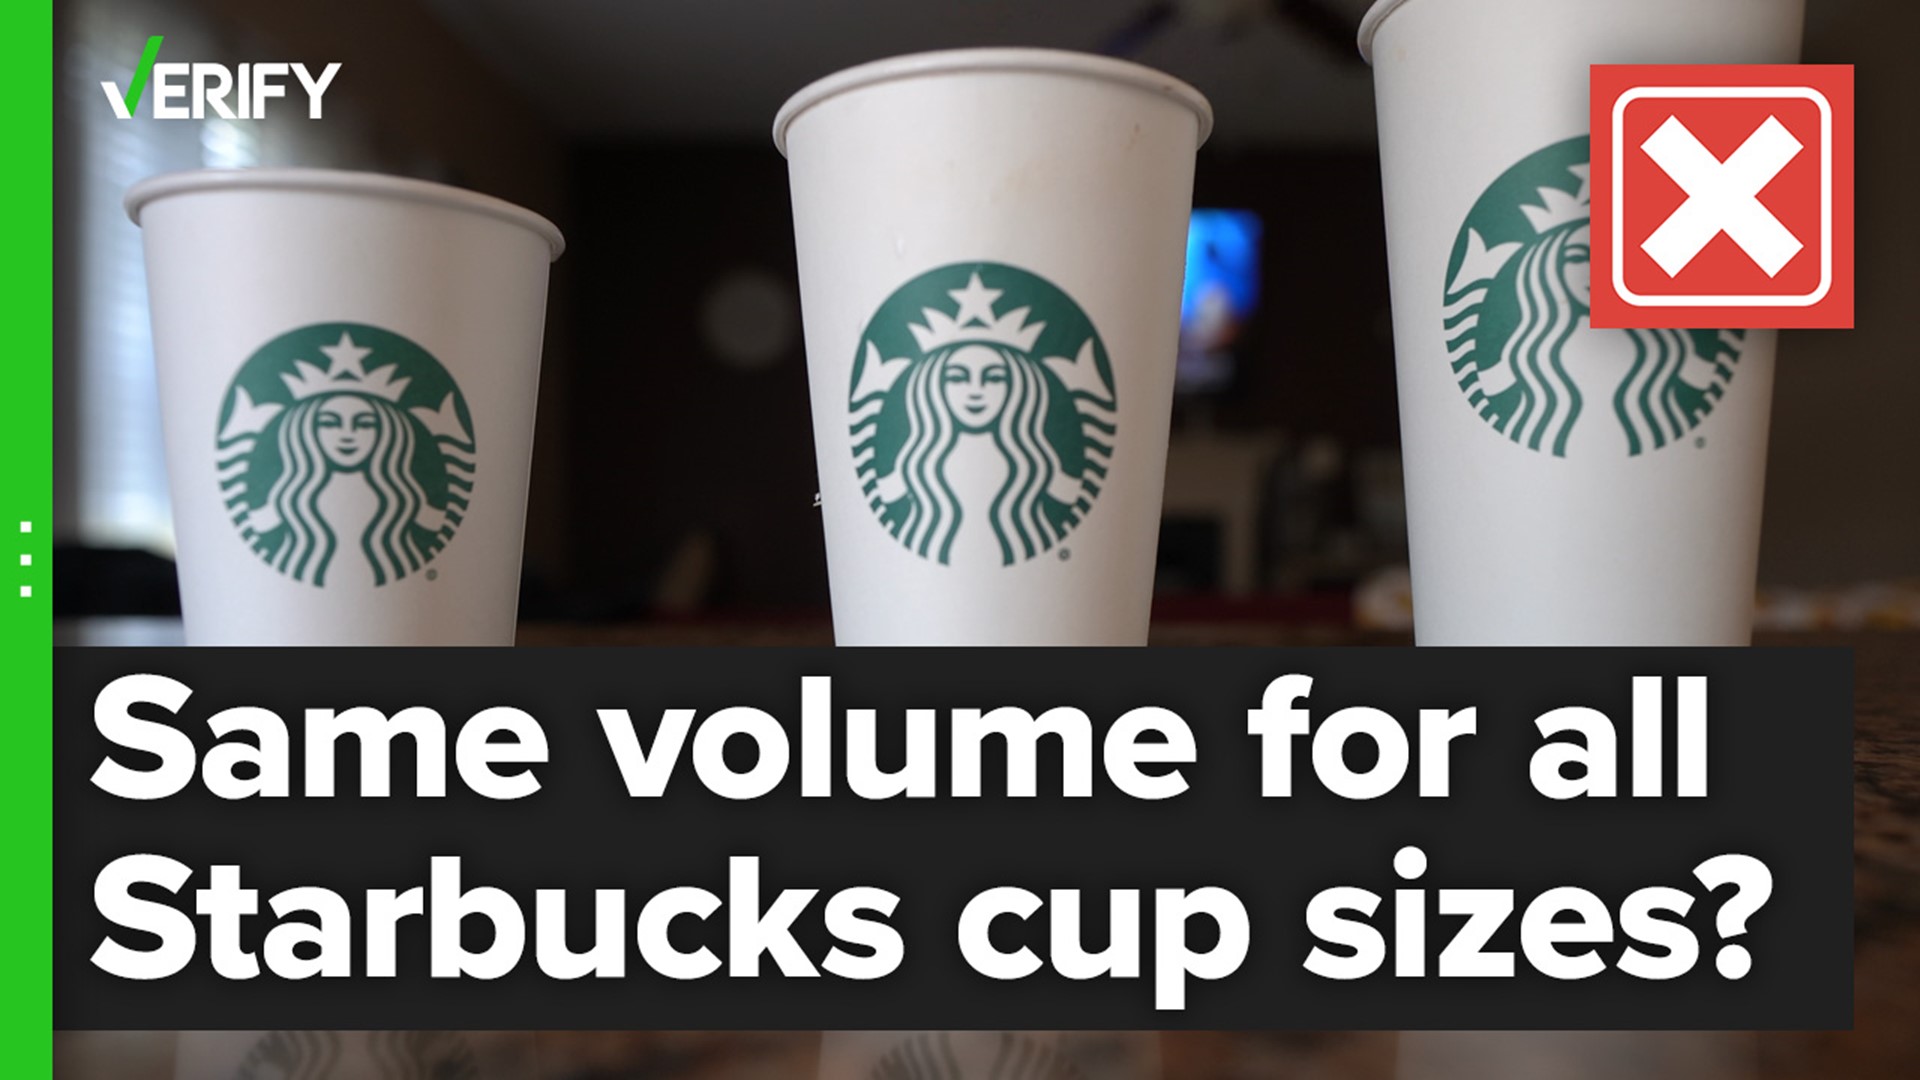 Social media videos claiming Starbucks hot cup sizes all hold the same amount of liquid are false.